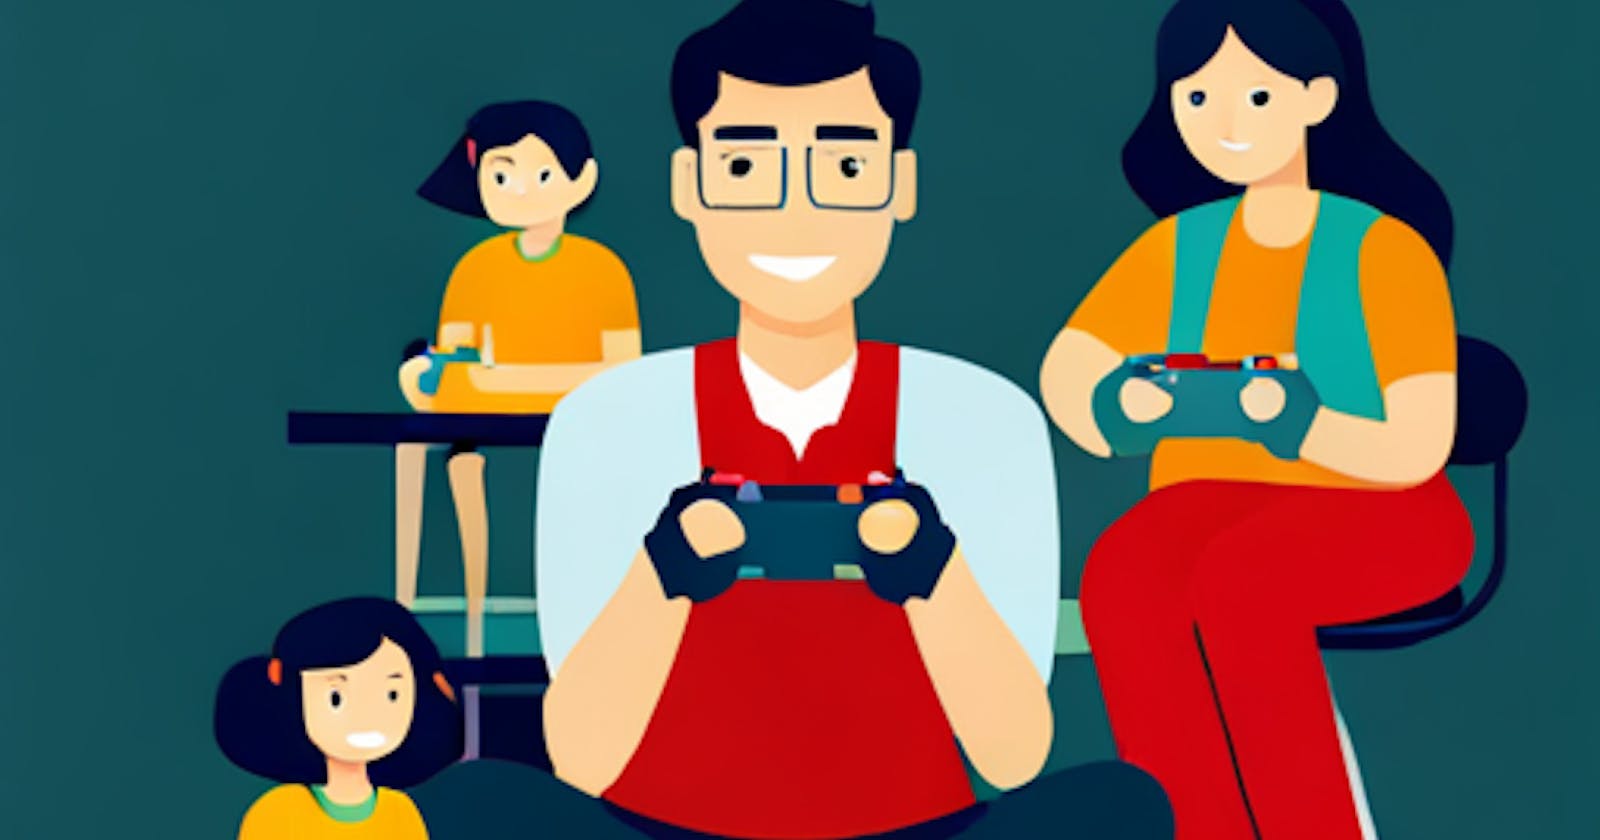 Social Aspects of Gaming: Fostering Healthy Relationships